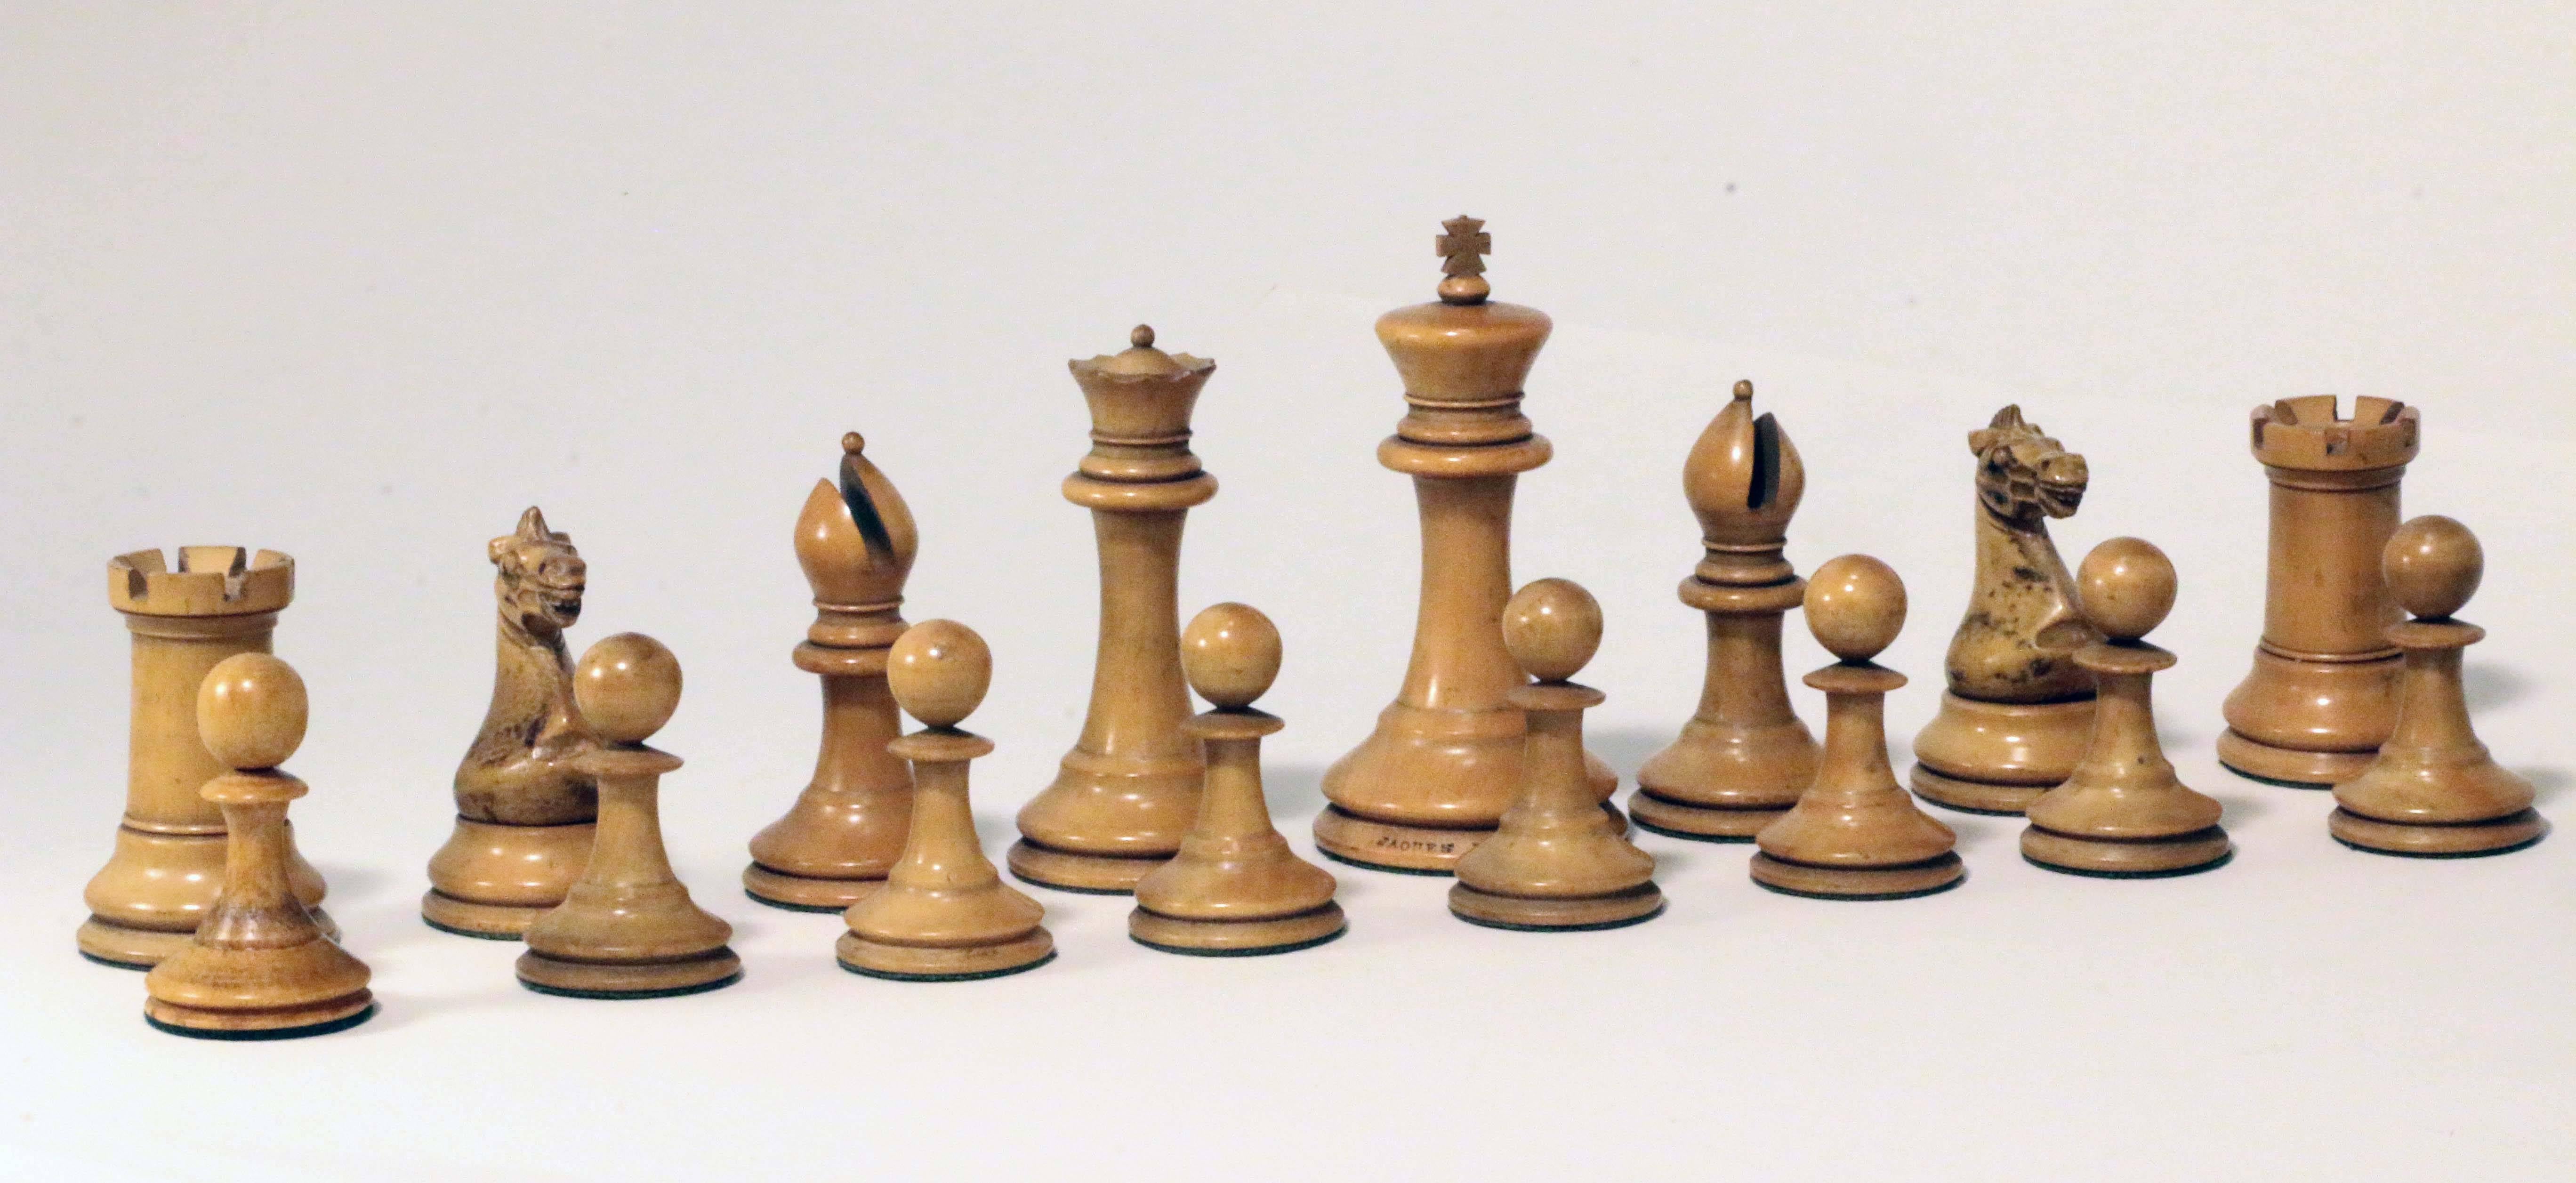 This Classic set was made by the celebrated Jaques of London before 1855 and is the model with the desirable 